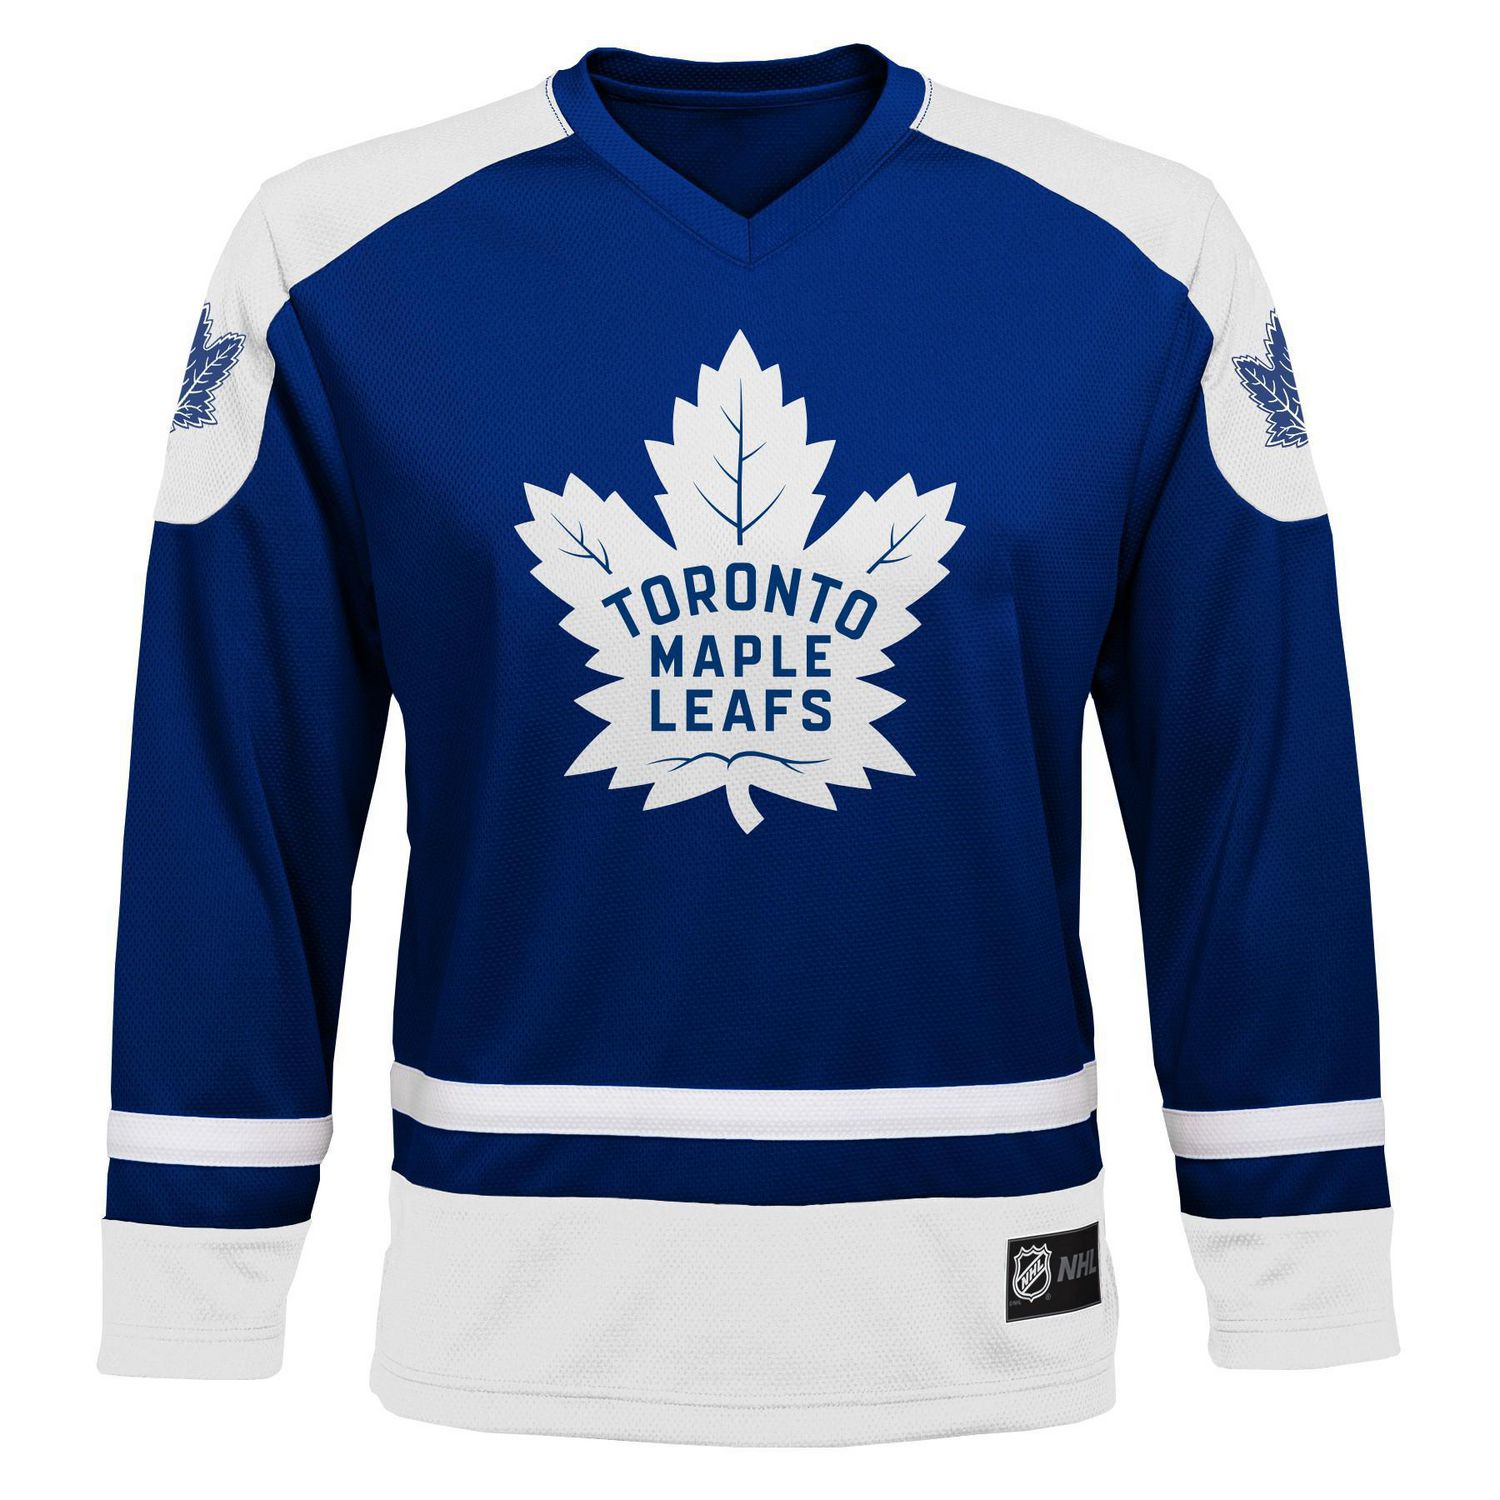 Toronto Maple Leafs on X: We'll be rocking the black and blue